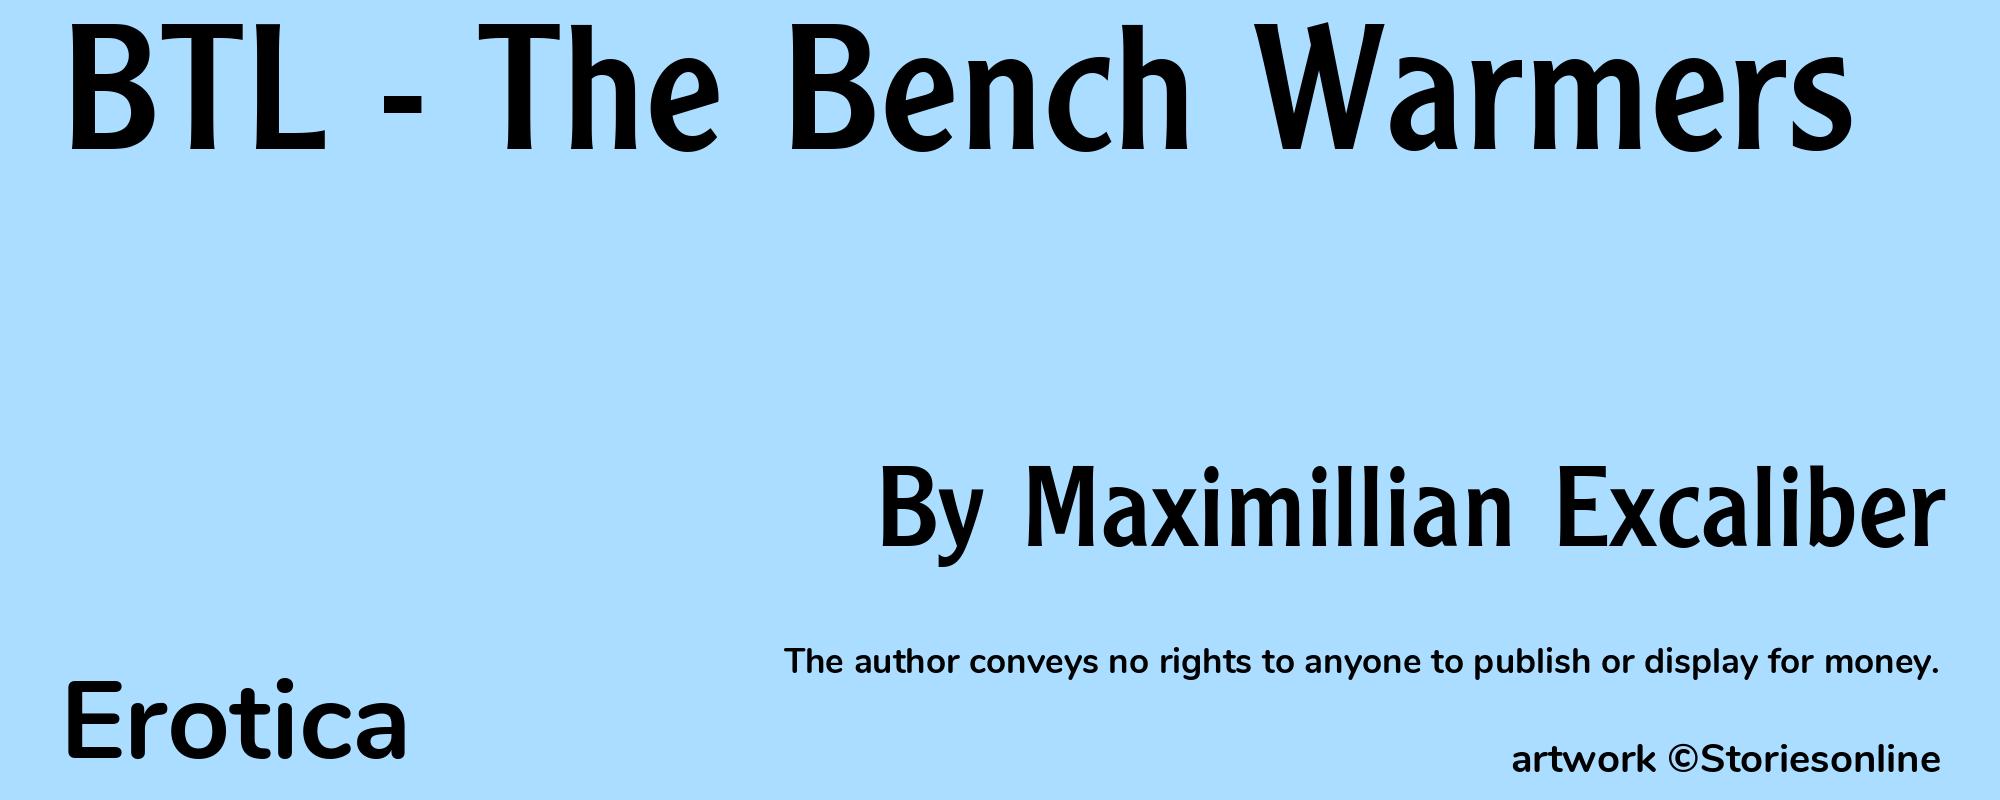 BTL - The Bench Warmers - Cover